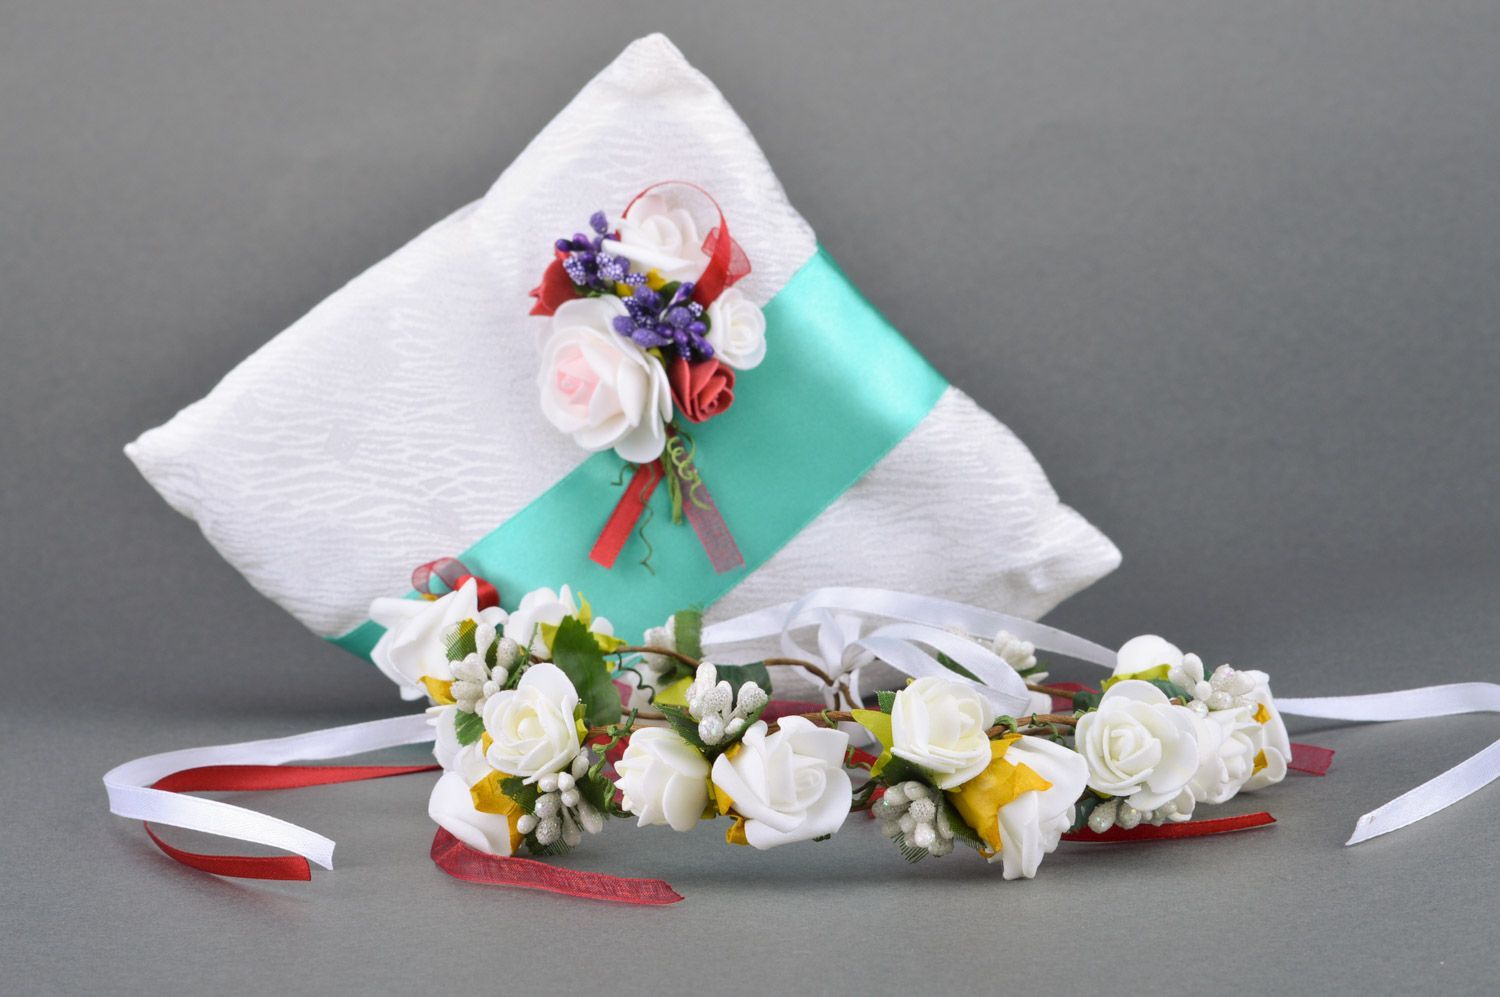 Handmade white and blue wedding accessories set rings pillow and floral headband photo 1